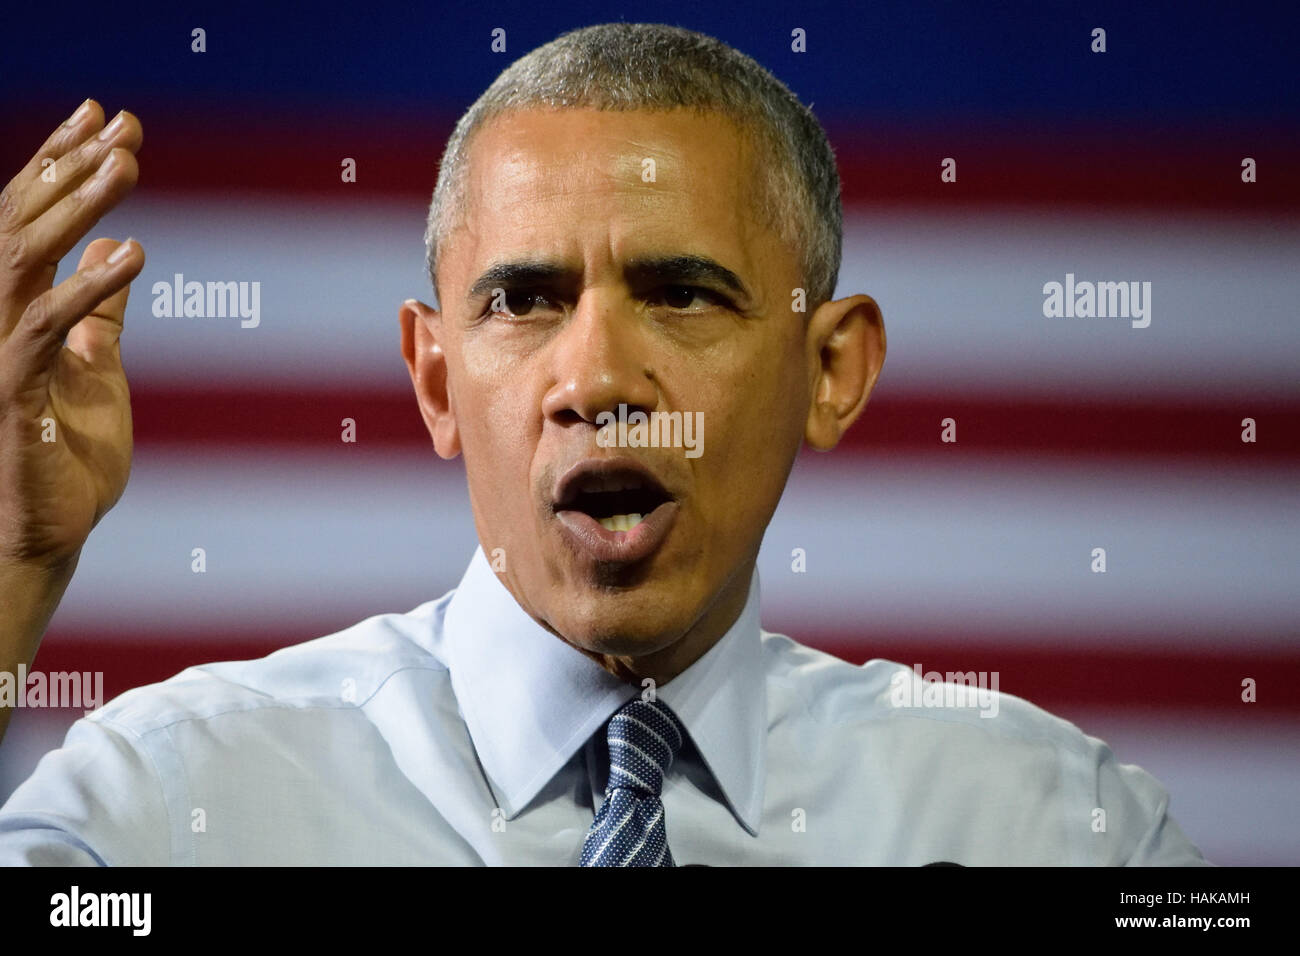 Barack Obama, President of the United States. Impactful speech against the American Flag background. Stock Photo